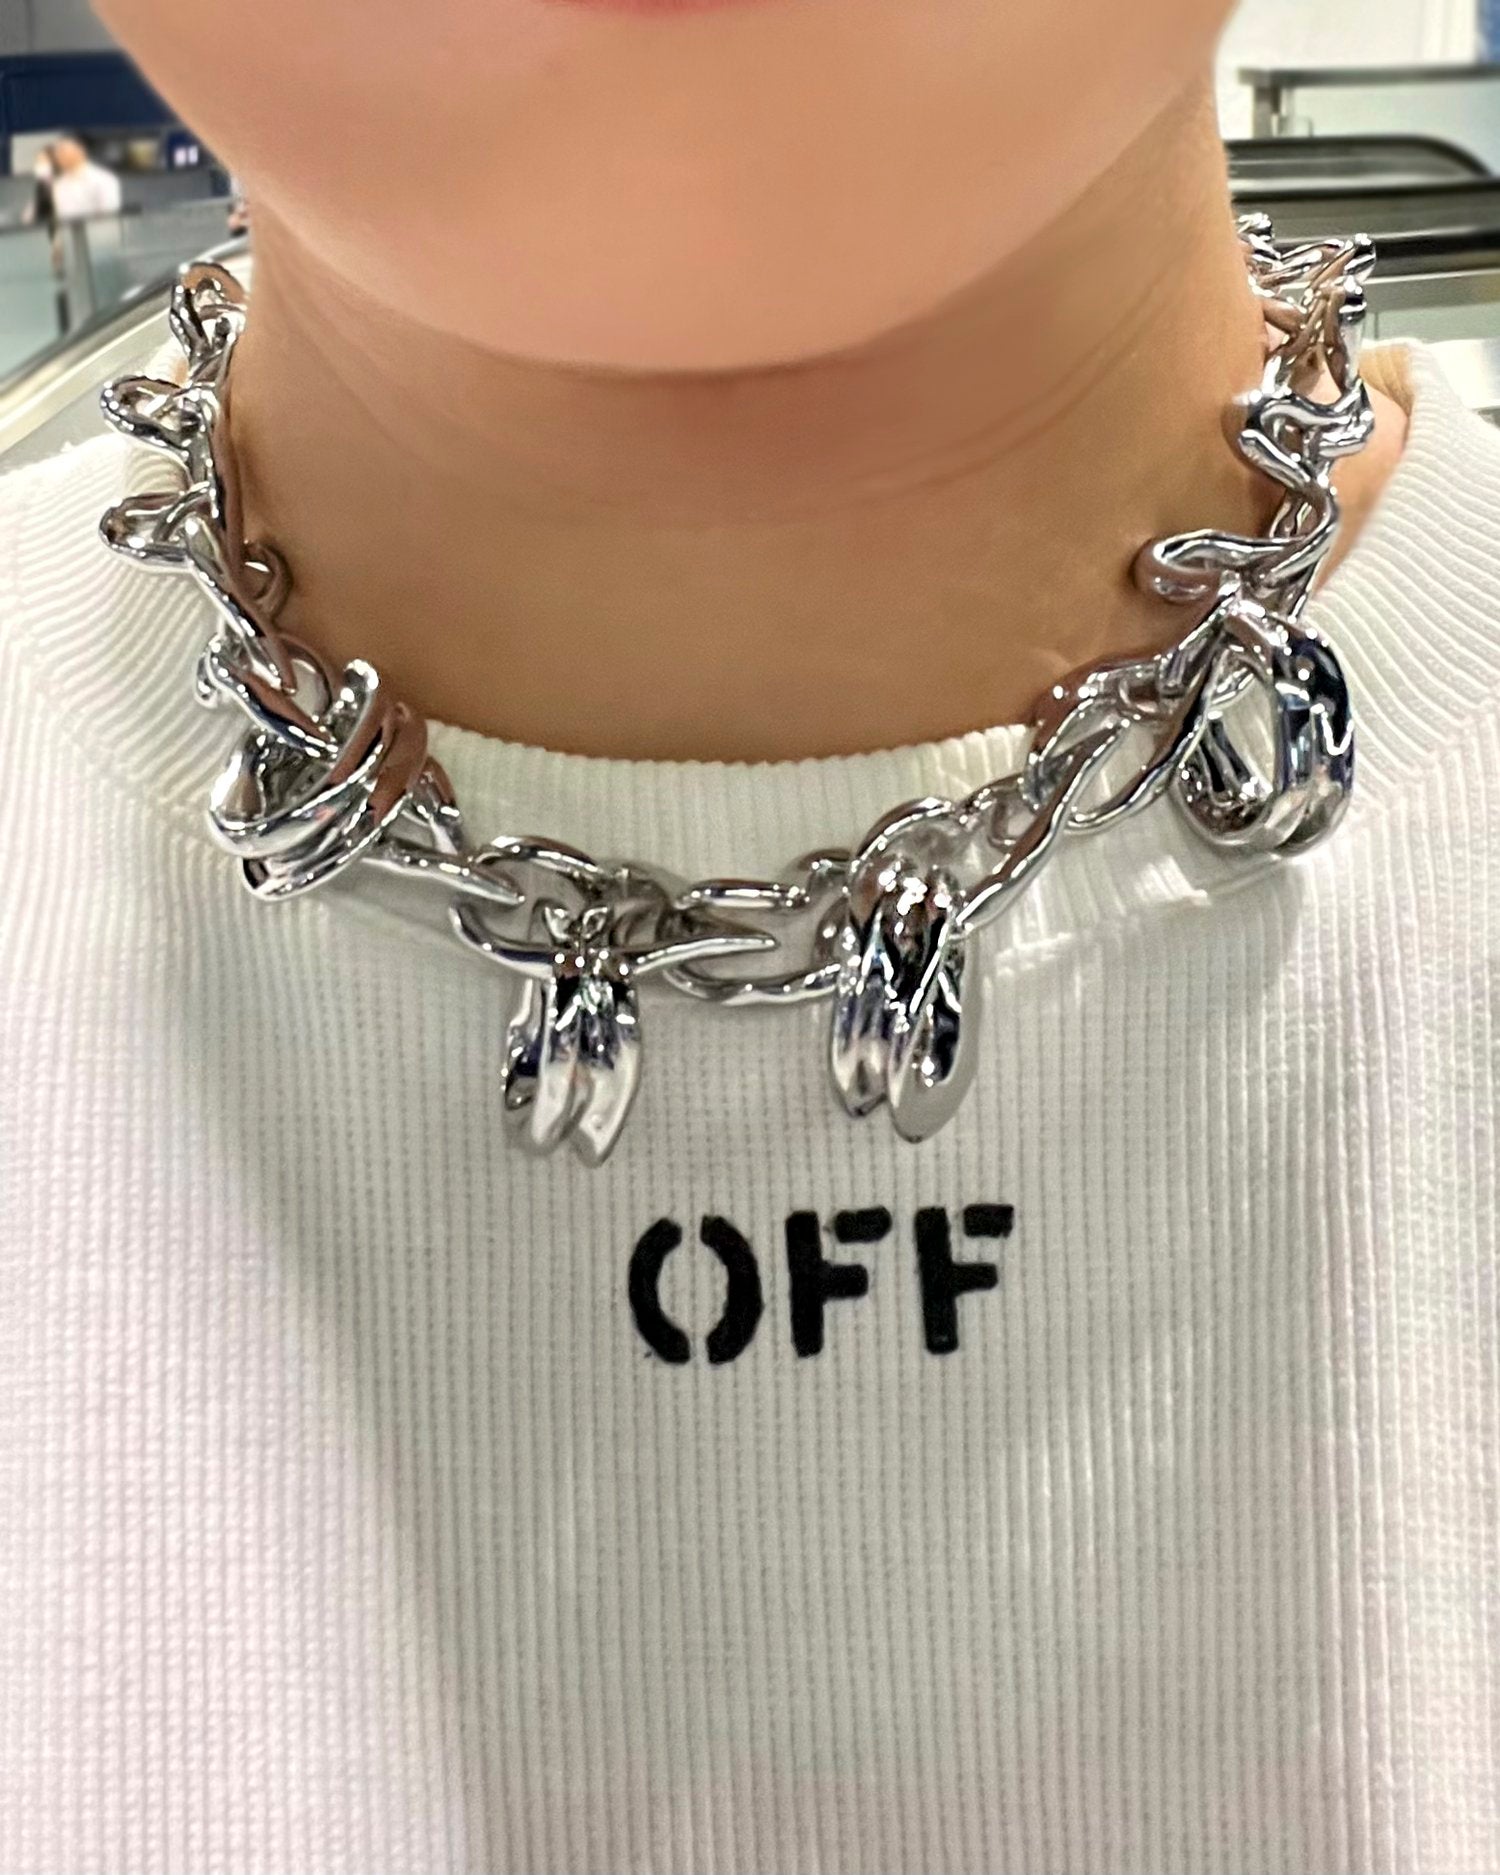 ALL-OVER HEARTS CHOKER NECKLACE WITH PENDANTS